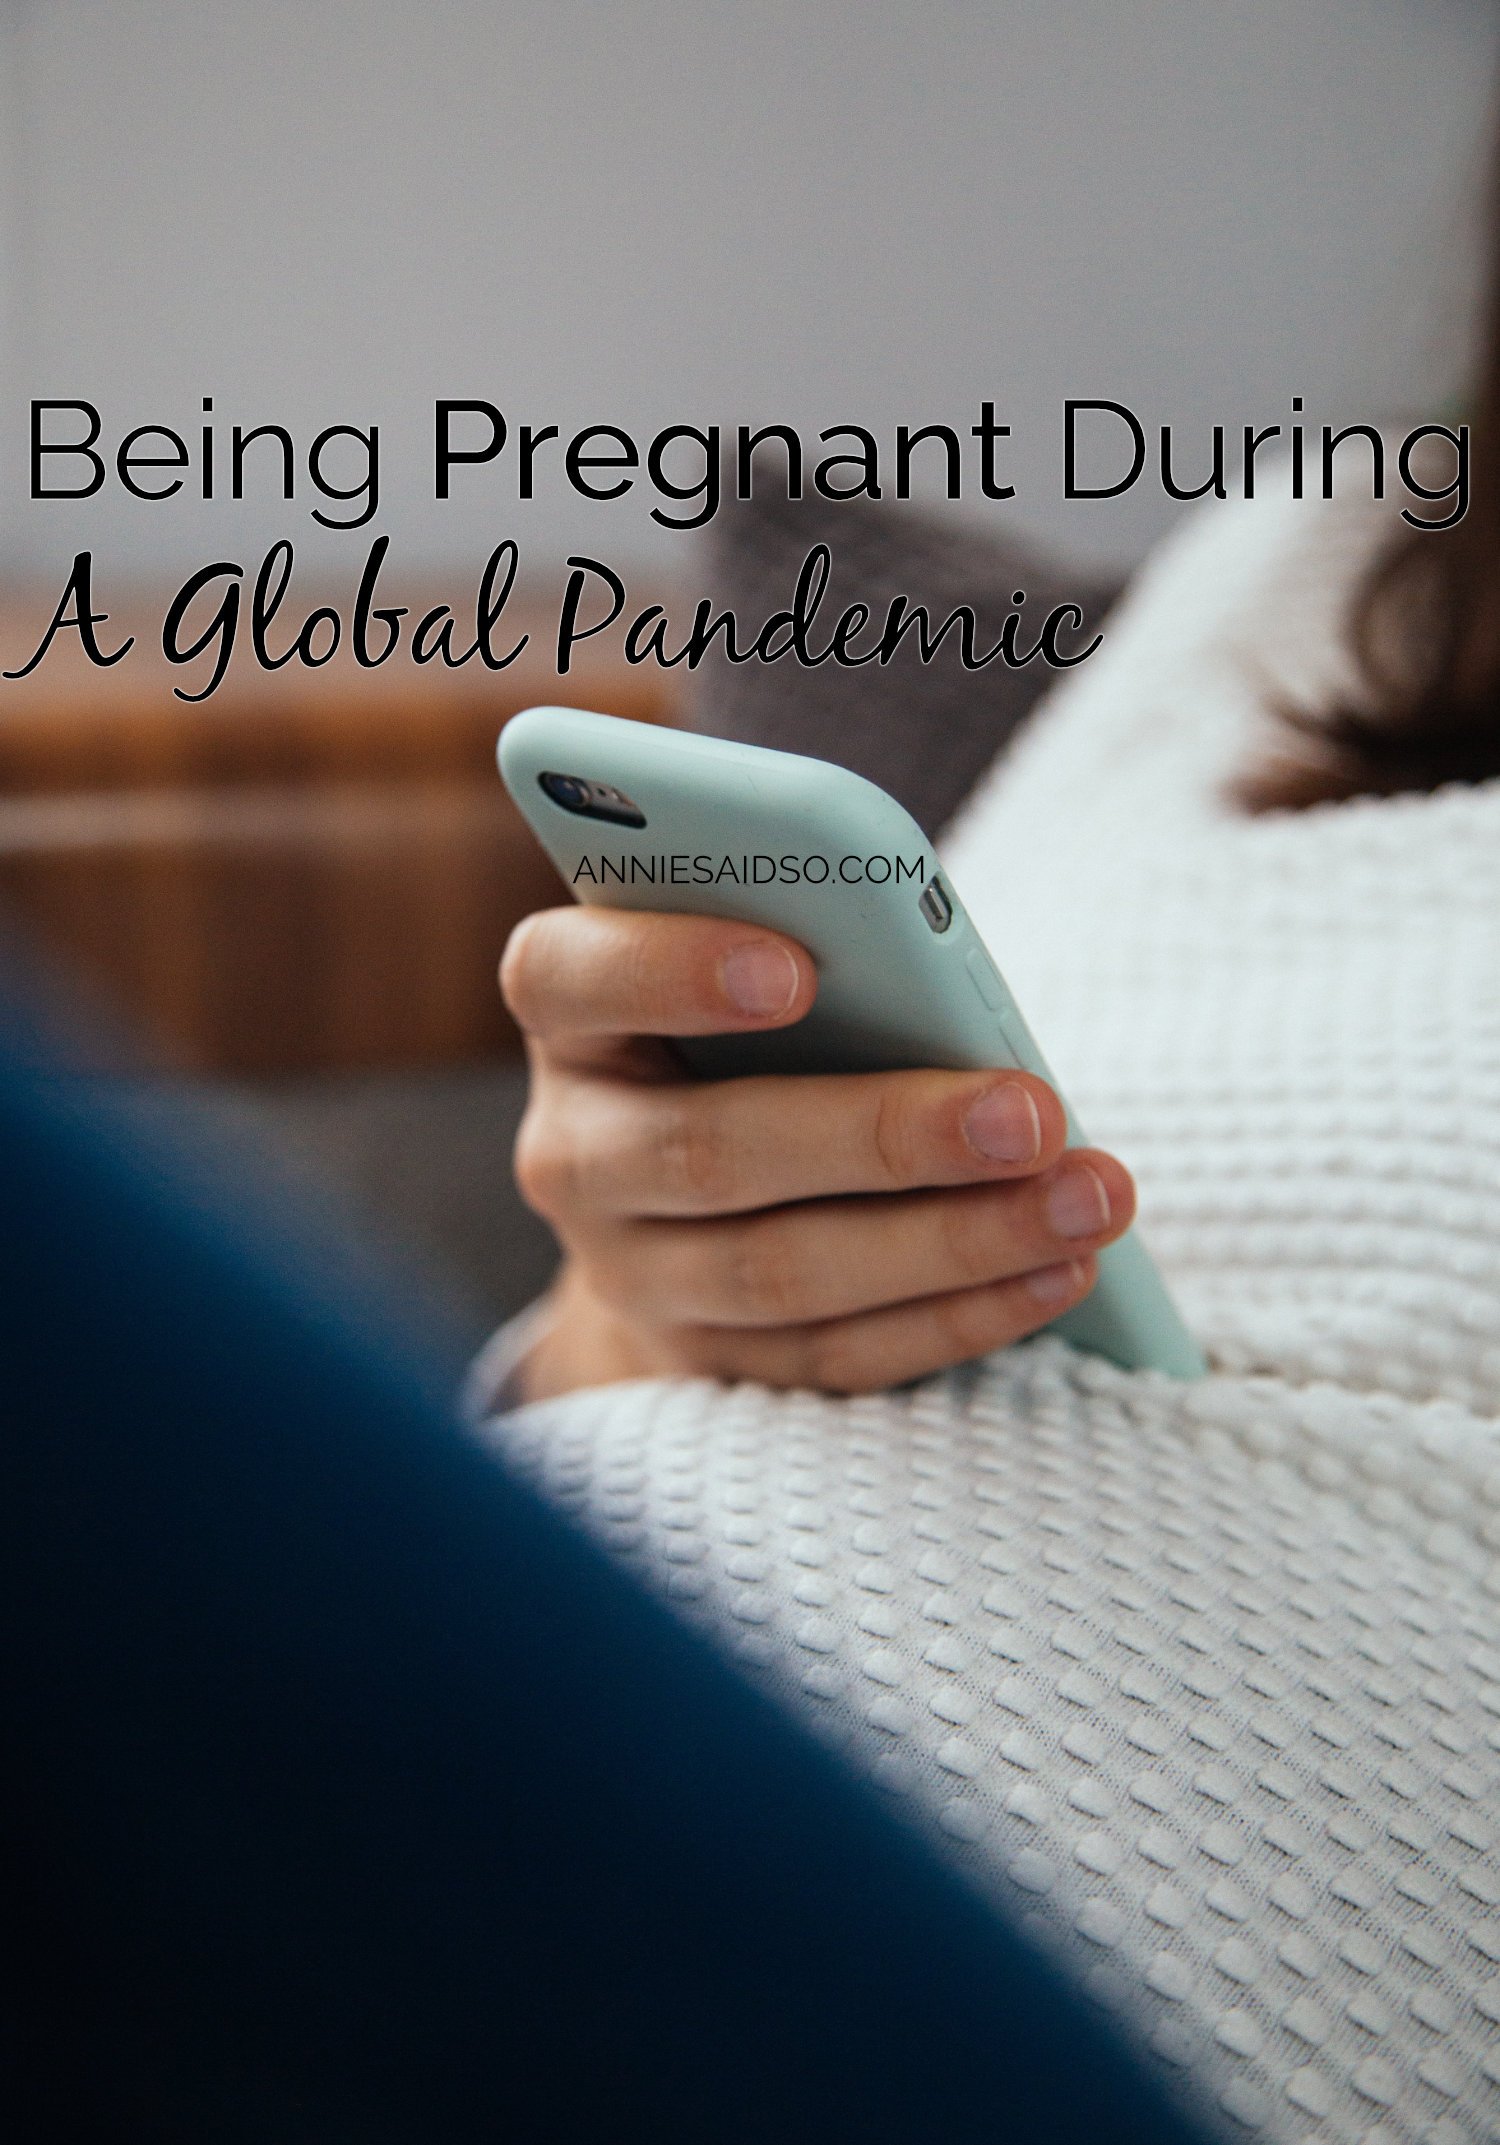 Being Pregnant During A Global Pandemic, Part 2